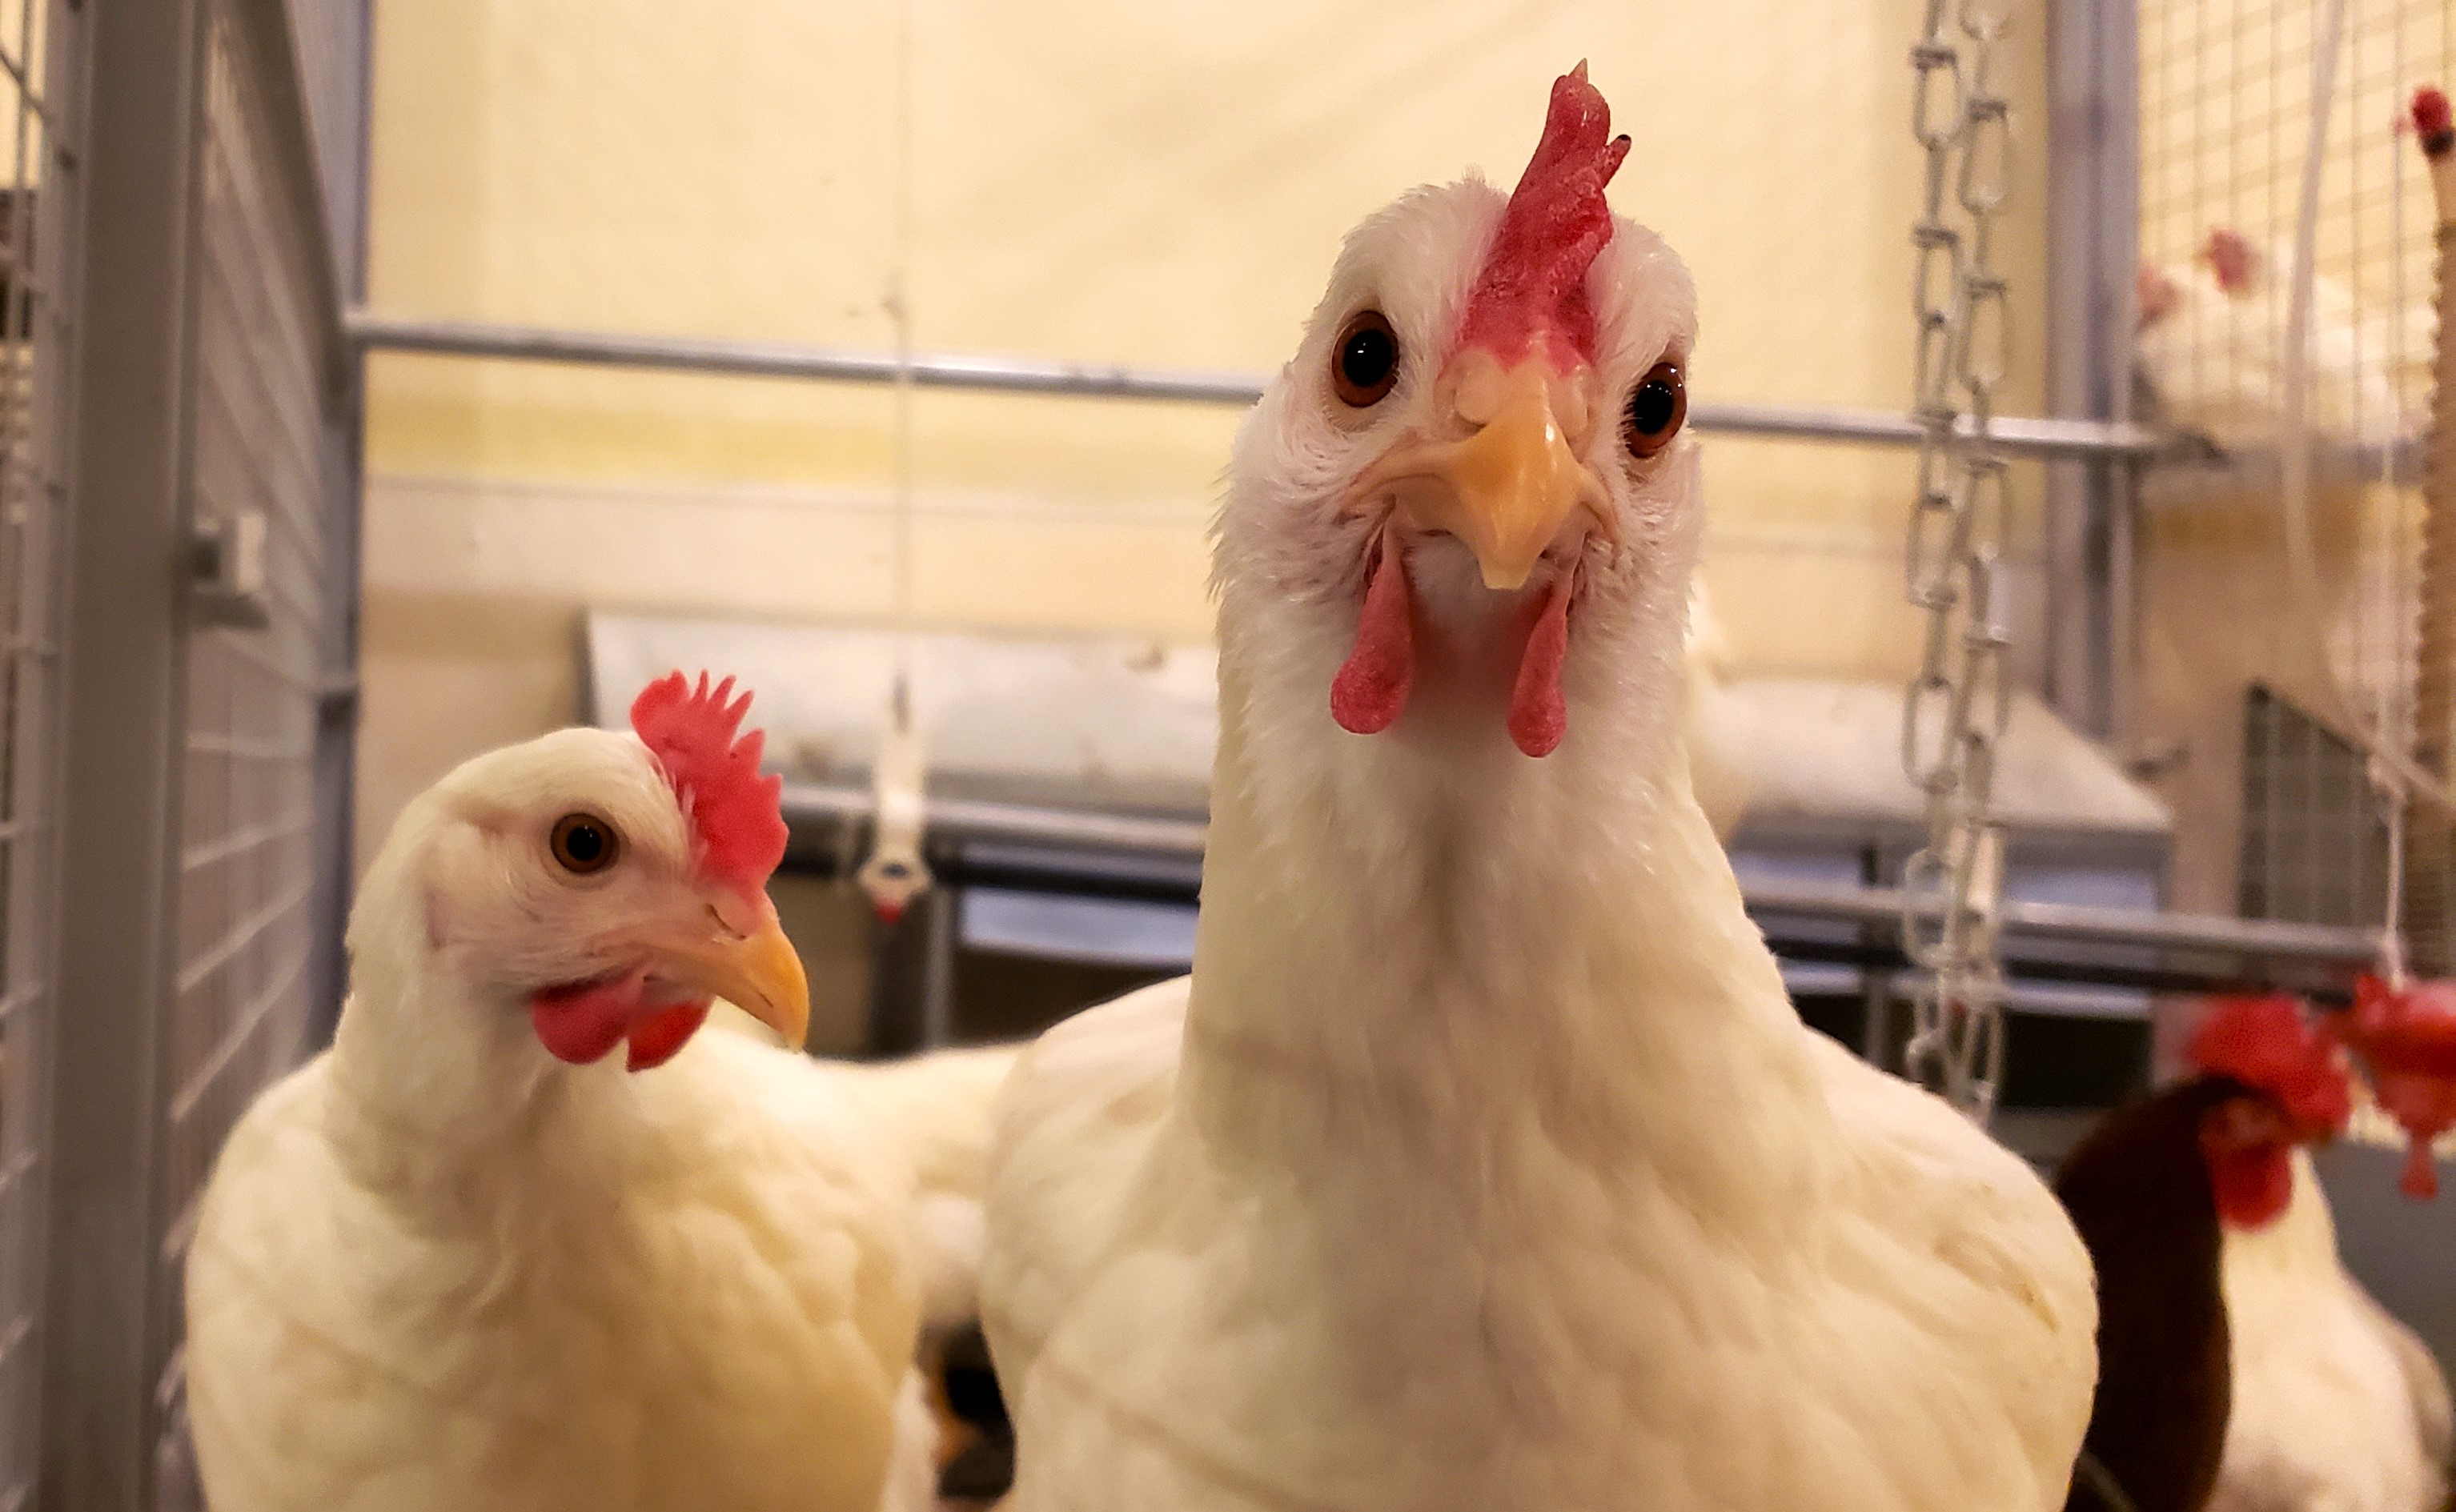 Two white chickens in a cage. One has an irritated expression on its face.